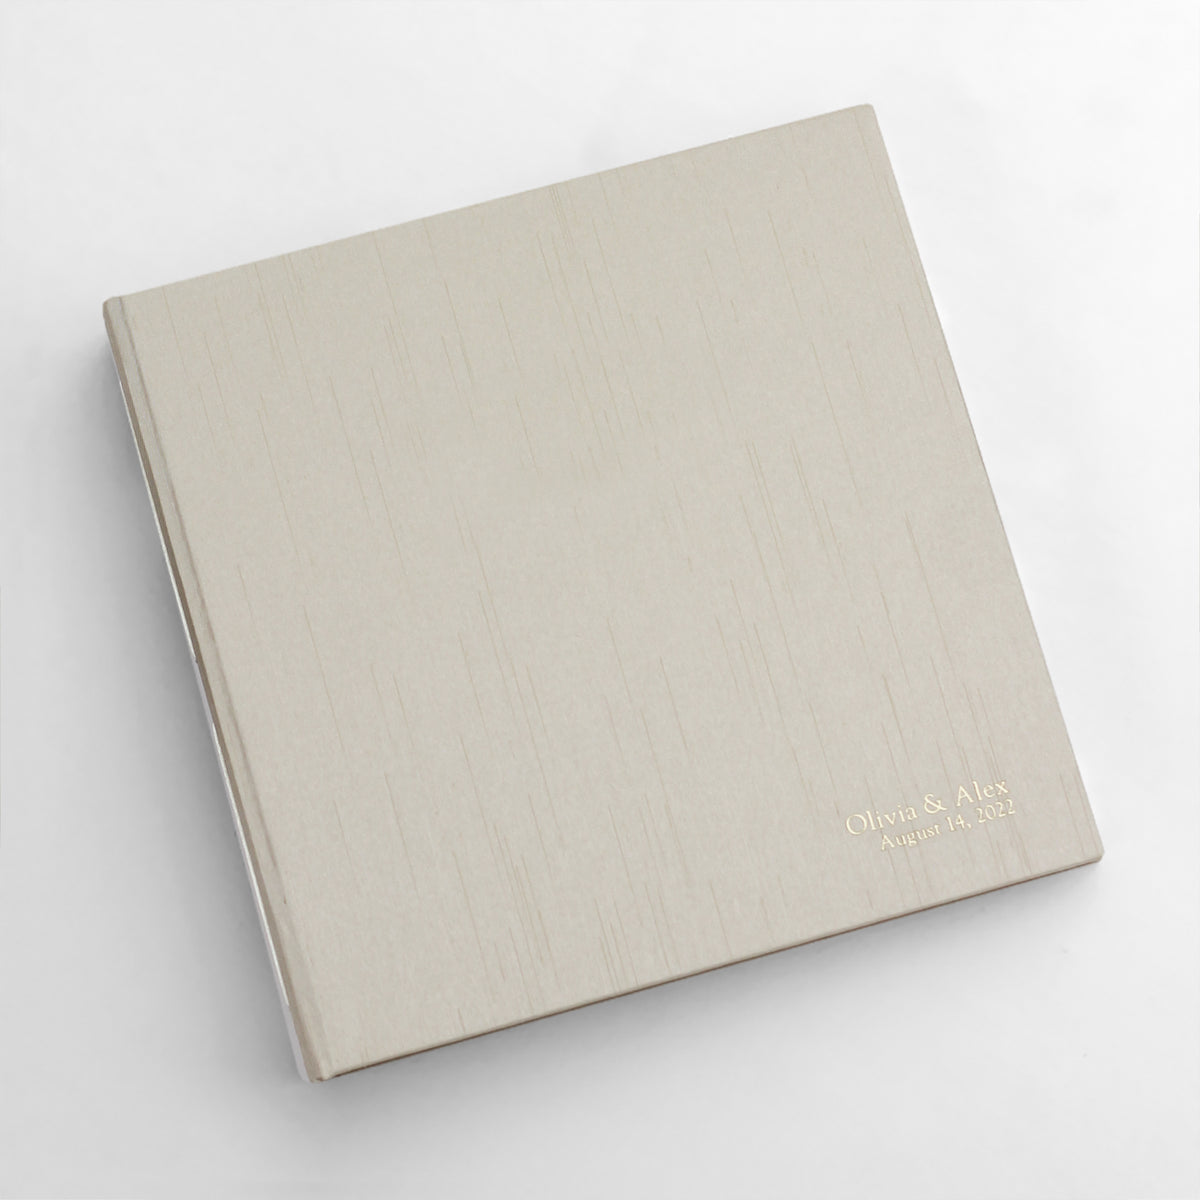 Event Guestbook | Cover: Champagne Silk | Available Personalized